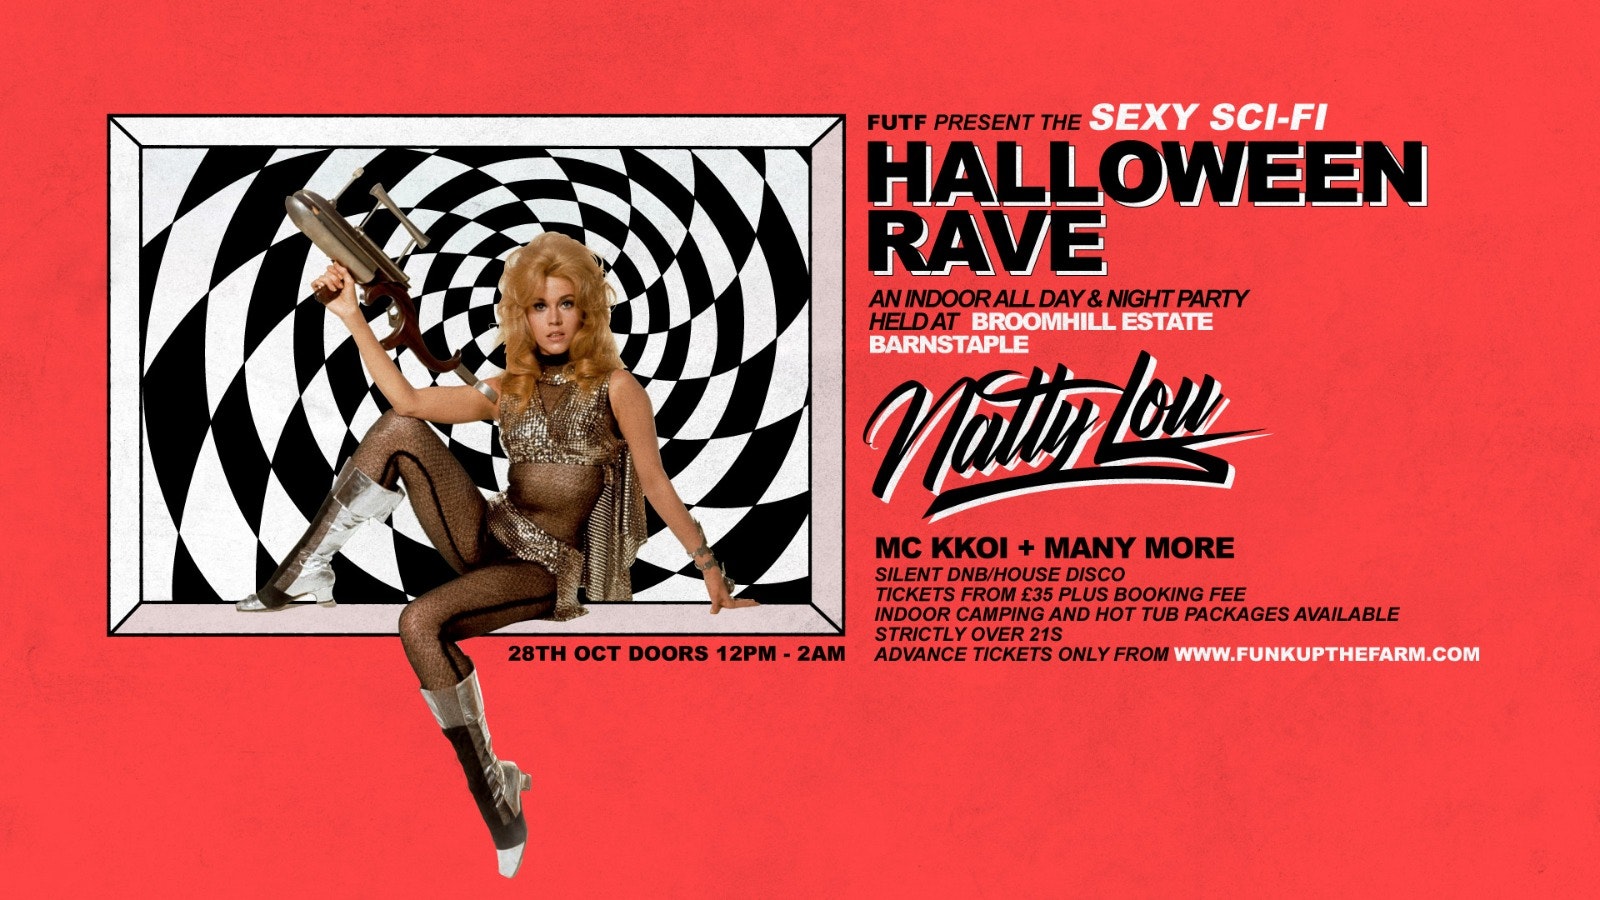 The Sexy SCI -FI All Day/Night Halloween Rave!